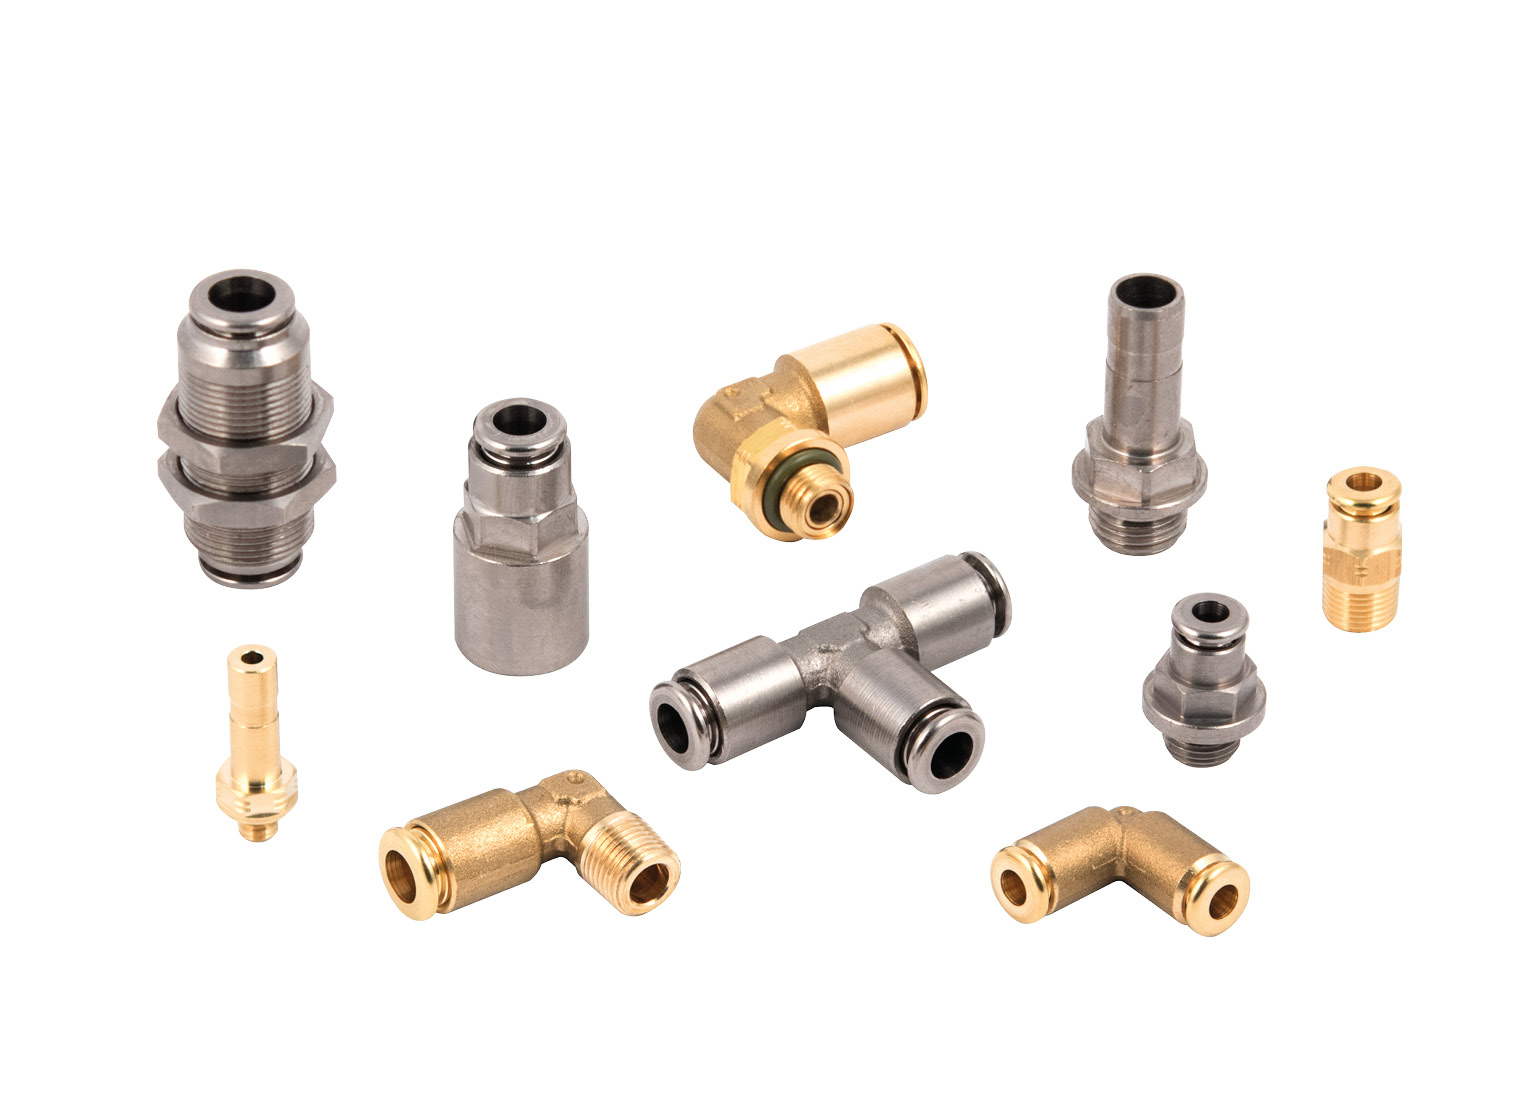 SERIES F-E AND F-NSF PUSH-IN FITTINGS FOR USE IN THE FOOD INDUSTRY